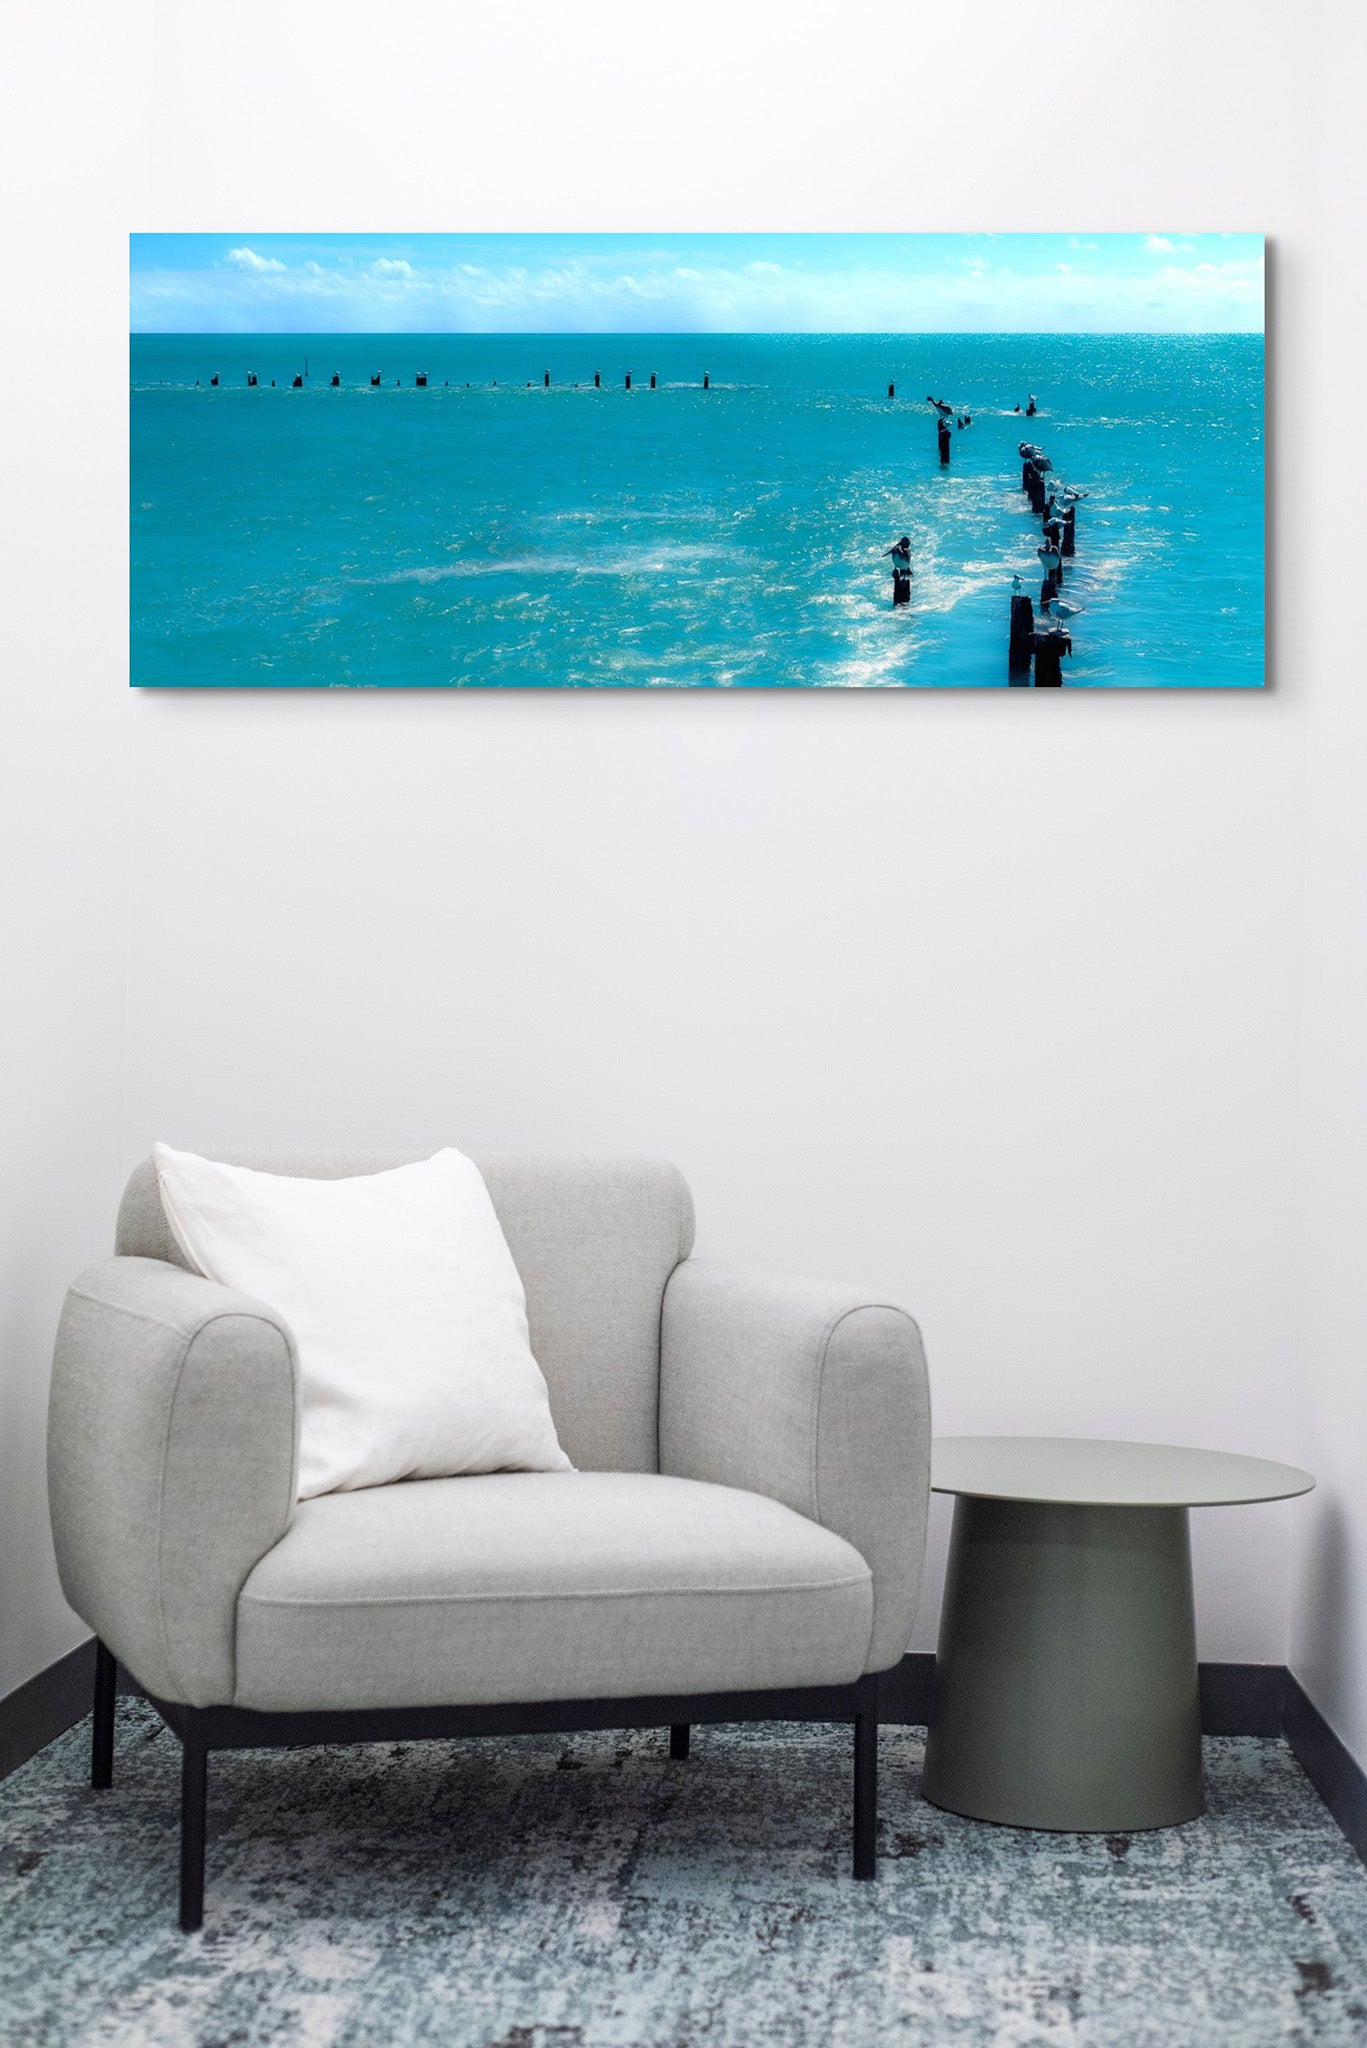 Picture hanging on the wall of a room with a chair. The picture is a fine art landscape photograph titled "Island Time" by Cameron Dreaux of Dreaux Fine Art.